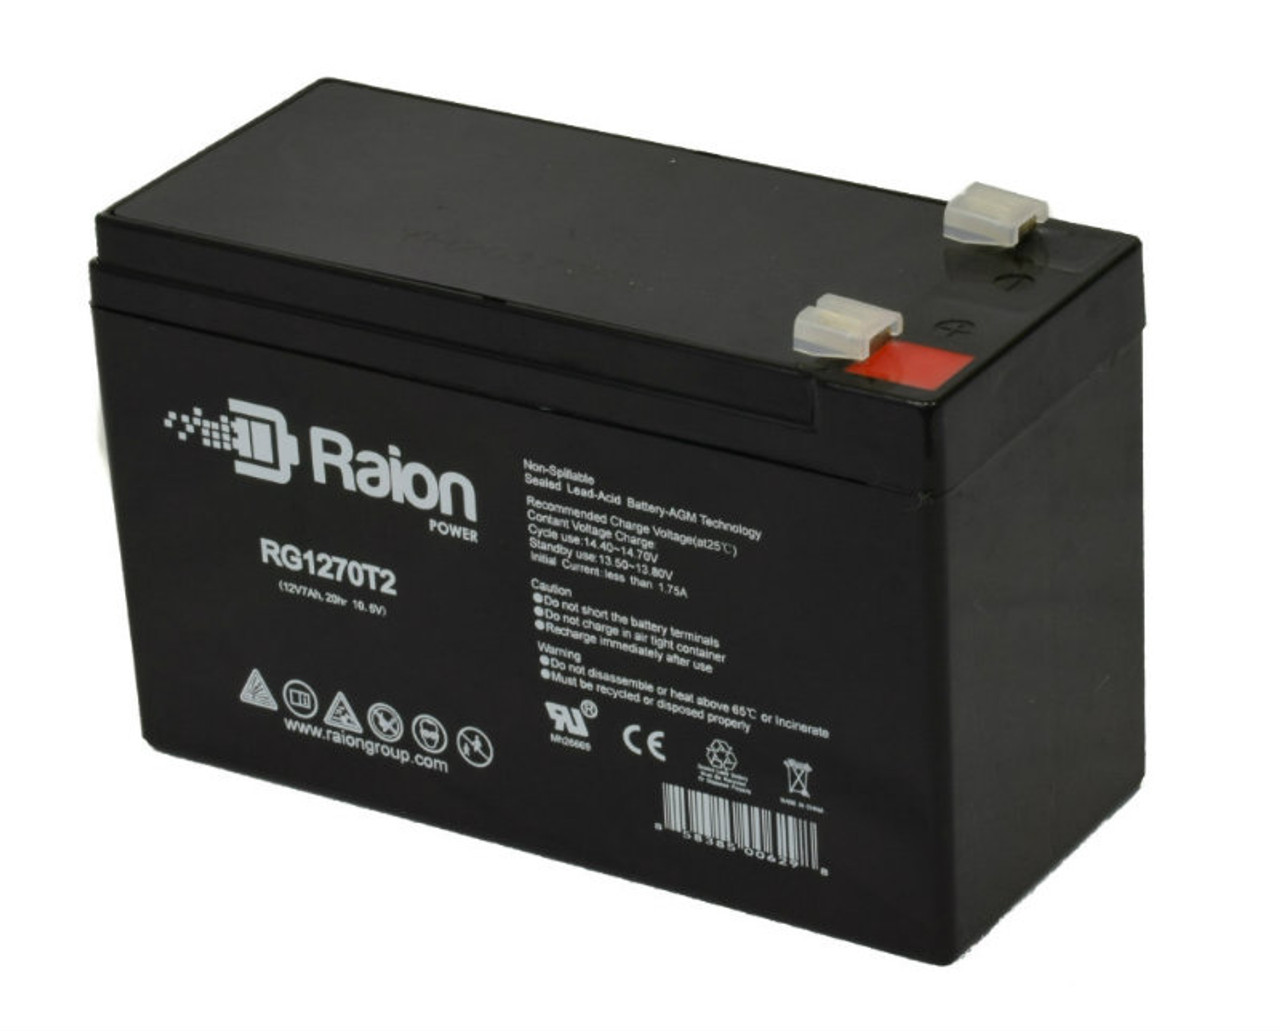 Raion Power RG1270T1 12V 7Ah Non-Spillable Replacement Battery for Europower EPL 7.2-12